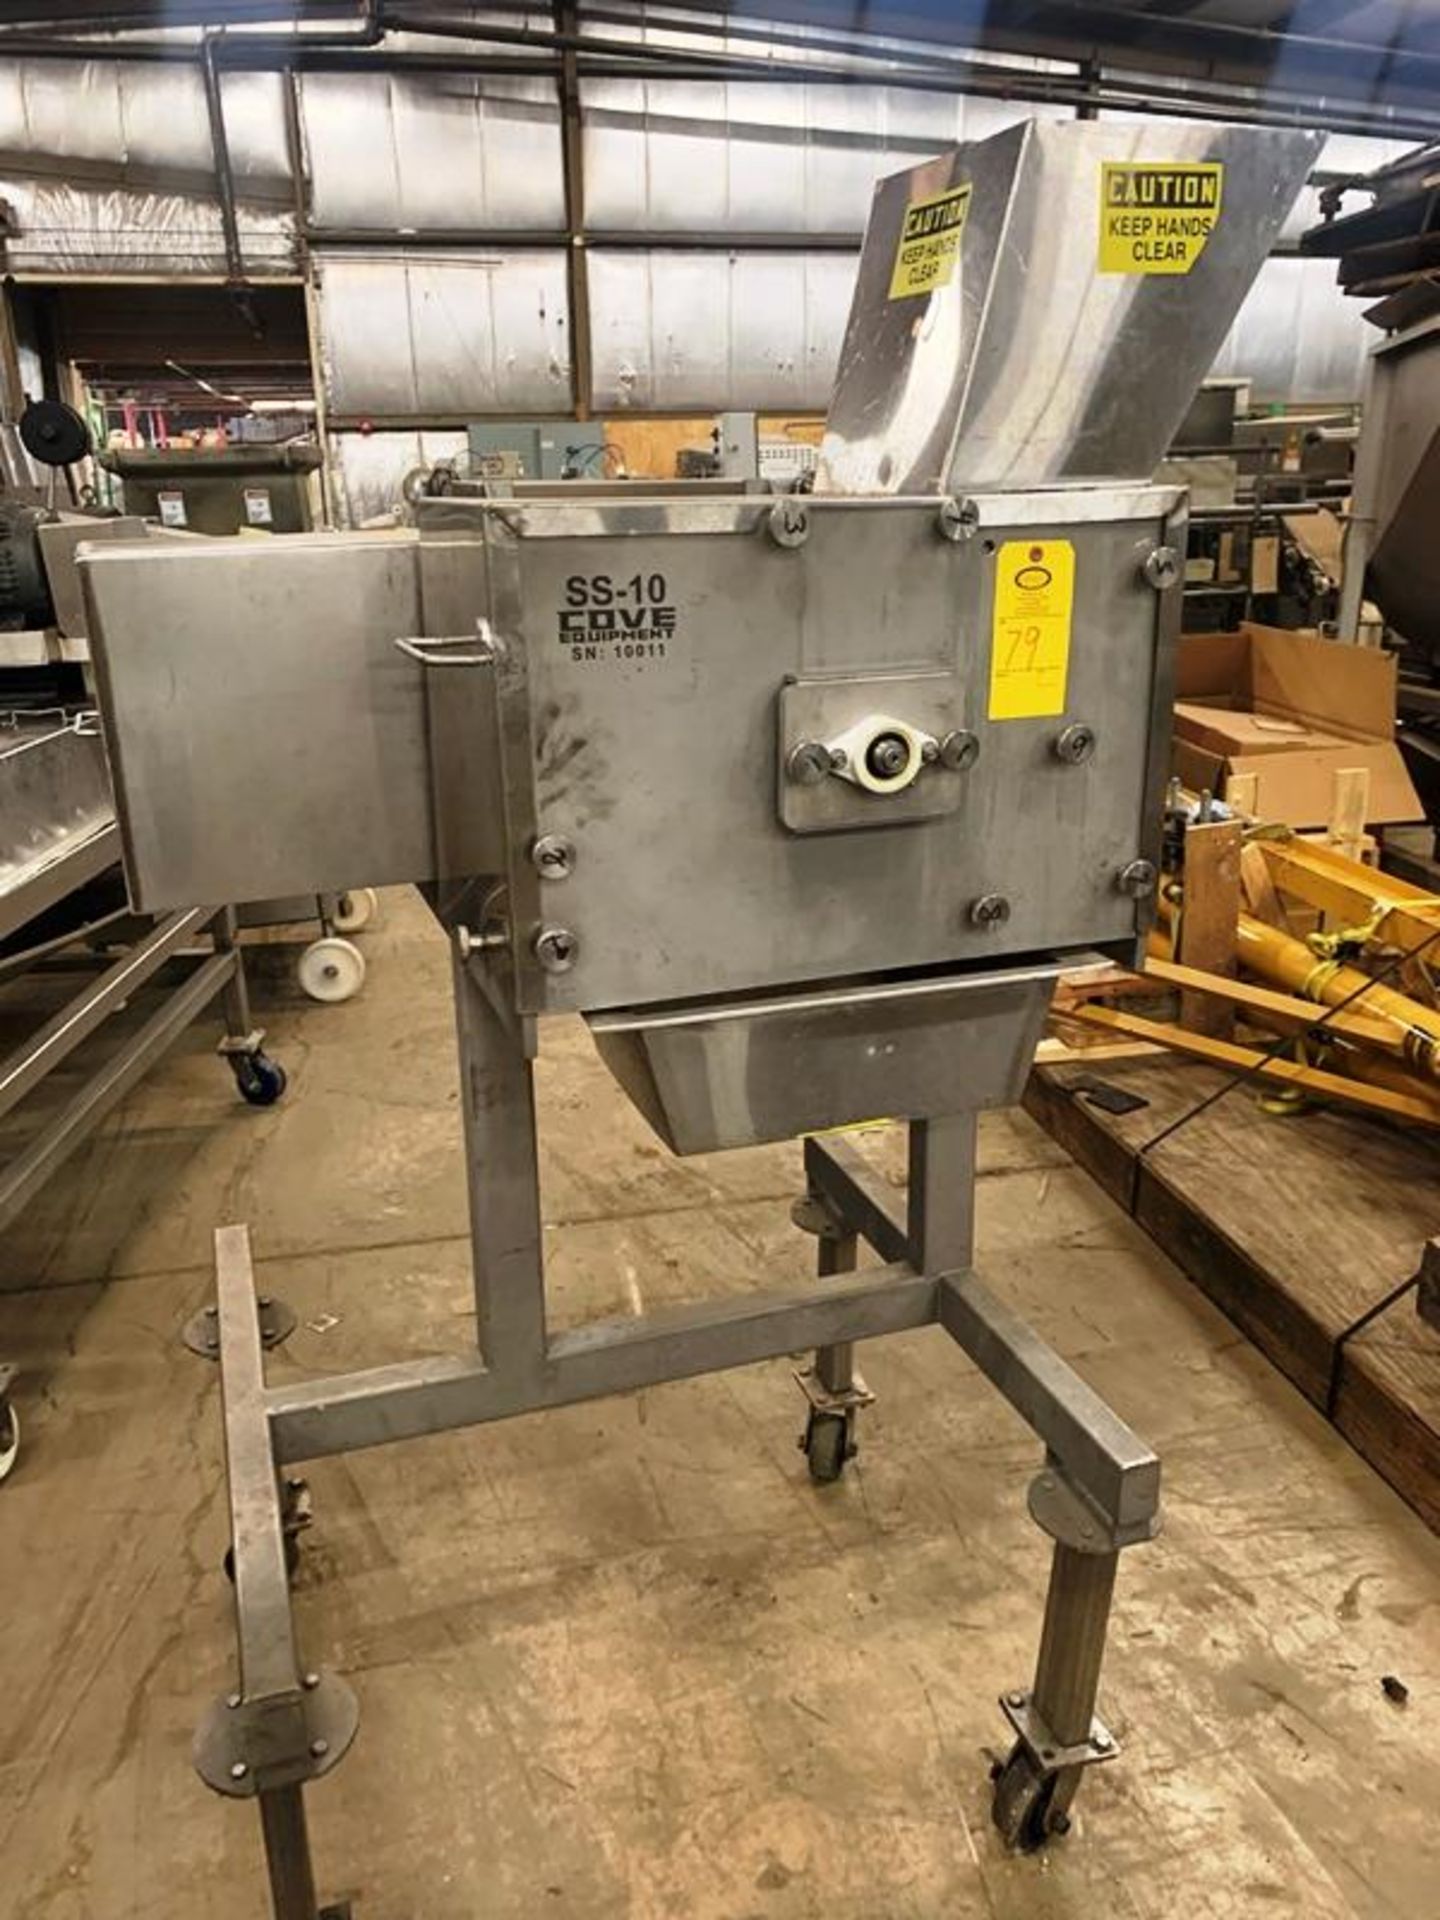 Cove Equipment Mdl. SS10 Jerky Slicer (Located in Sandwich, IL)